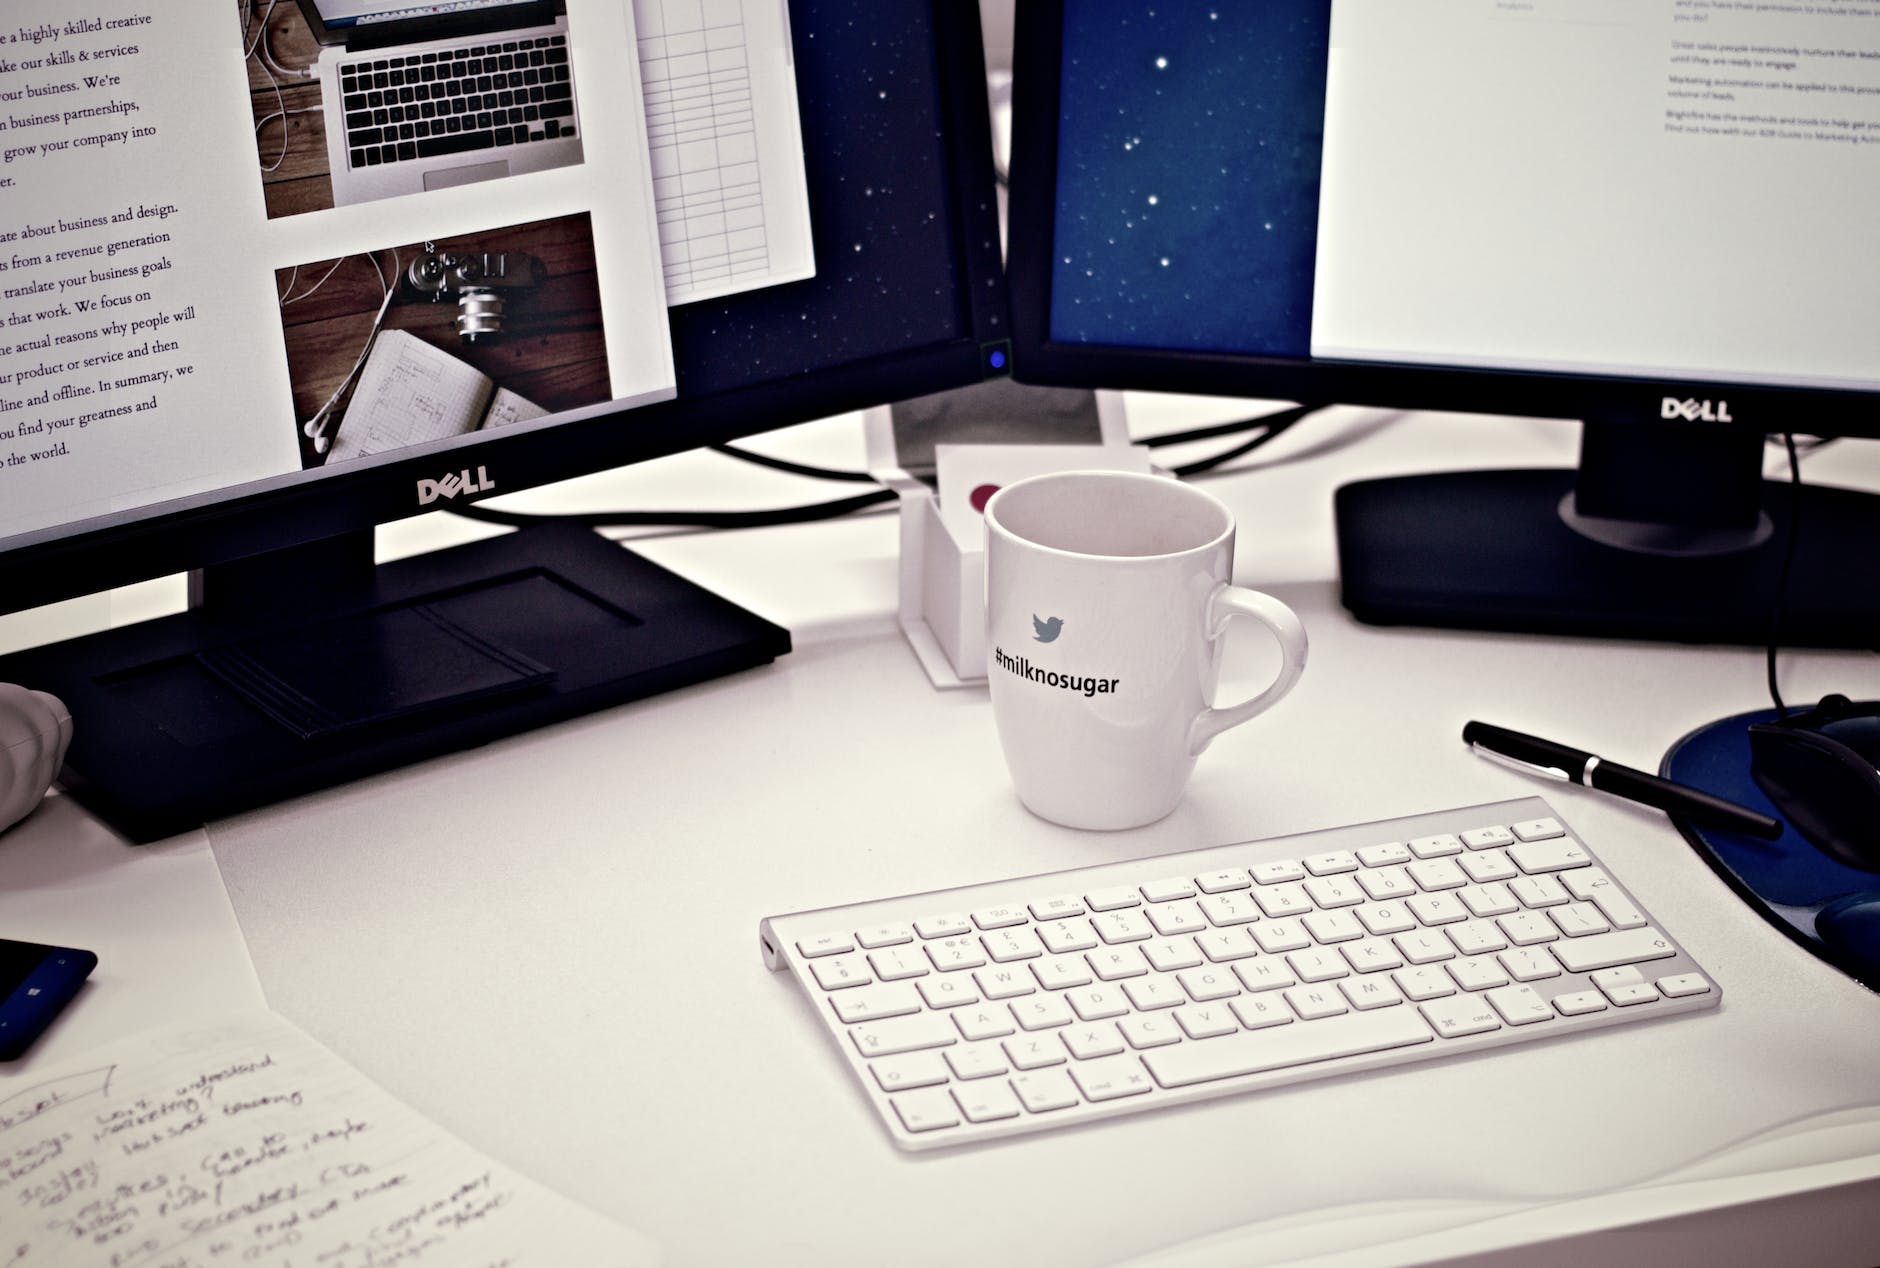 Partial view of two Dell monitors with text and images on them  on a white desk with a coffee mug in the middle below them, a black pen and mousepad with a partial picture of a mouse, and what looks like an Apple keyboard below the coffee mug and papers to the left with scribble notes